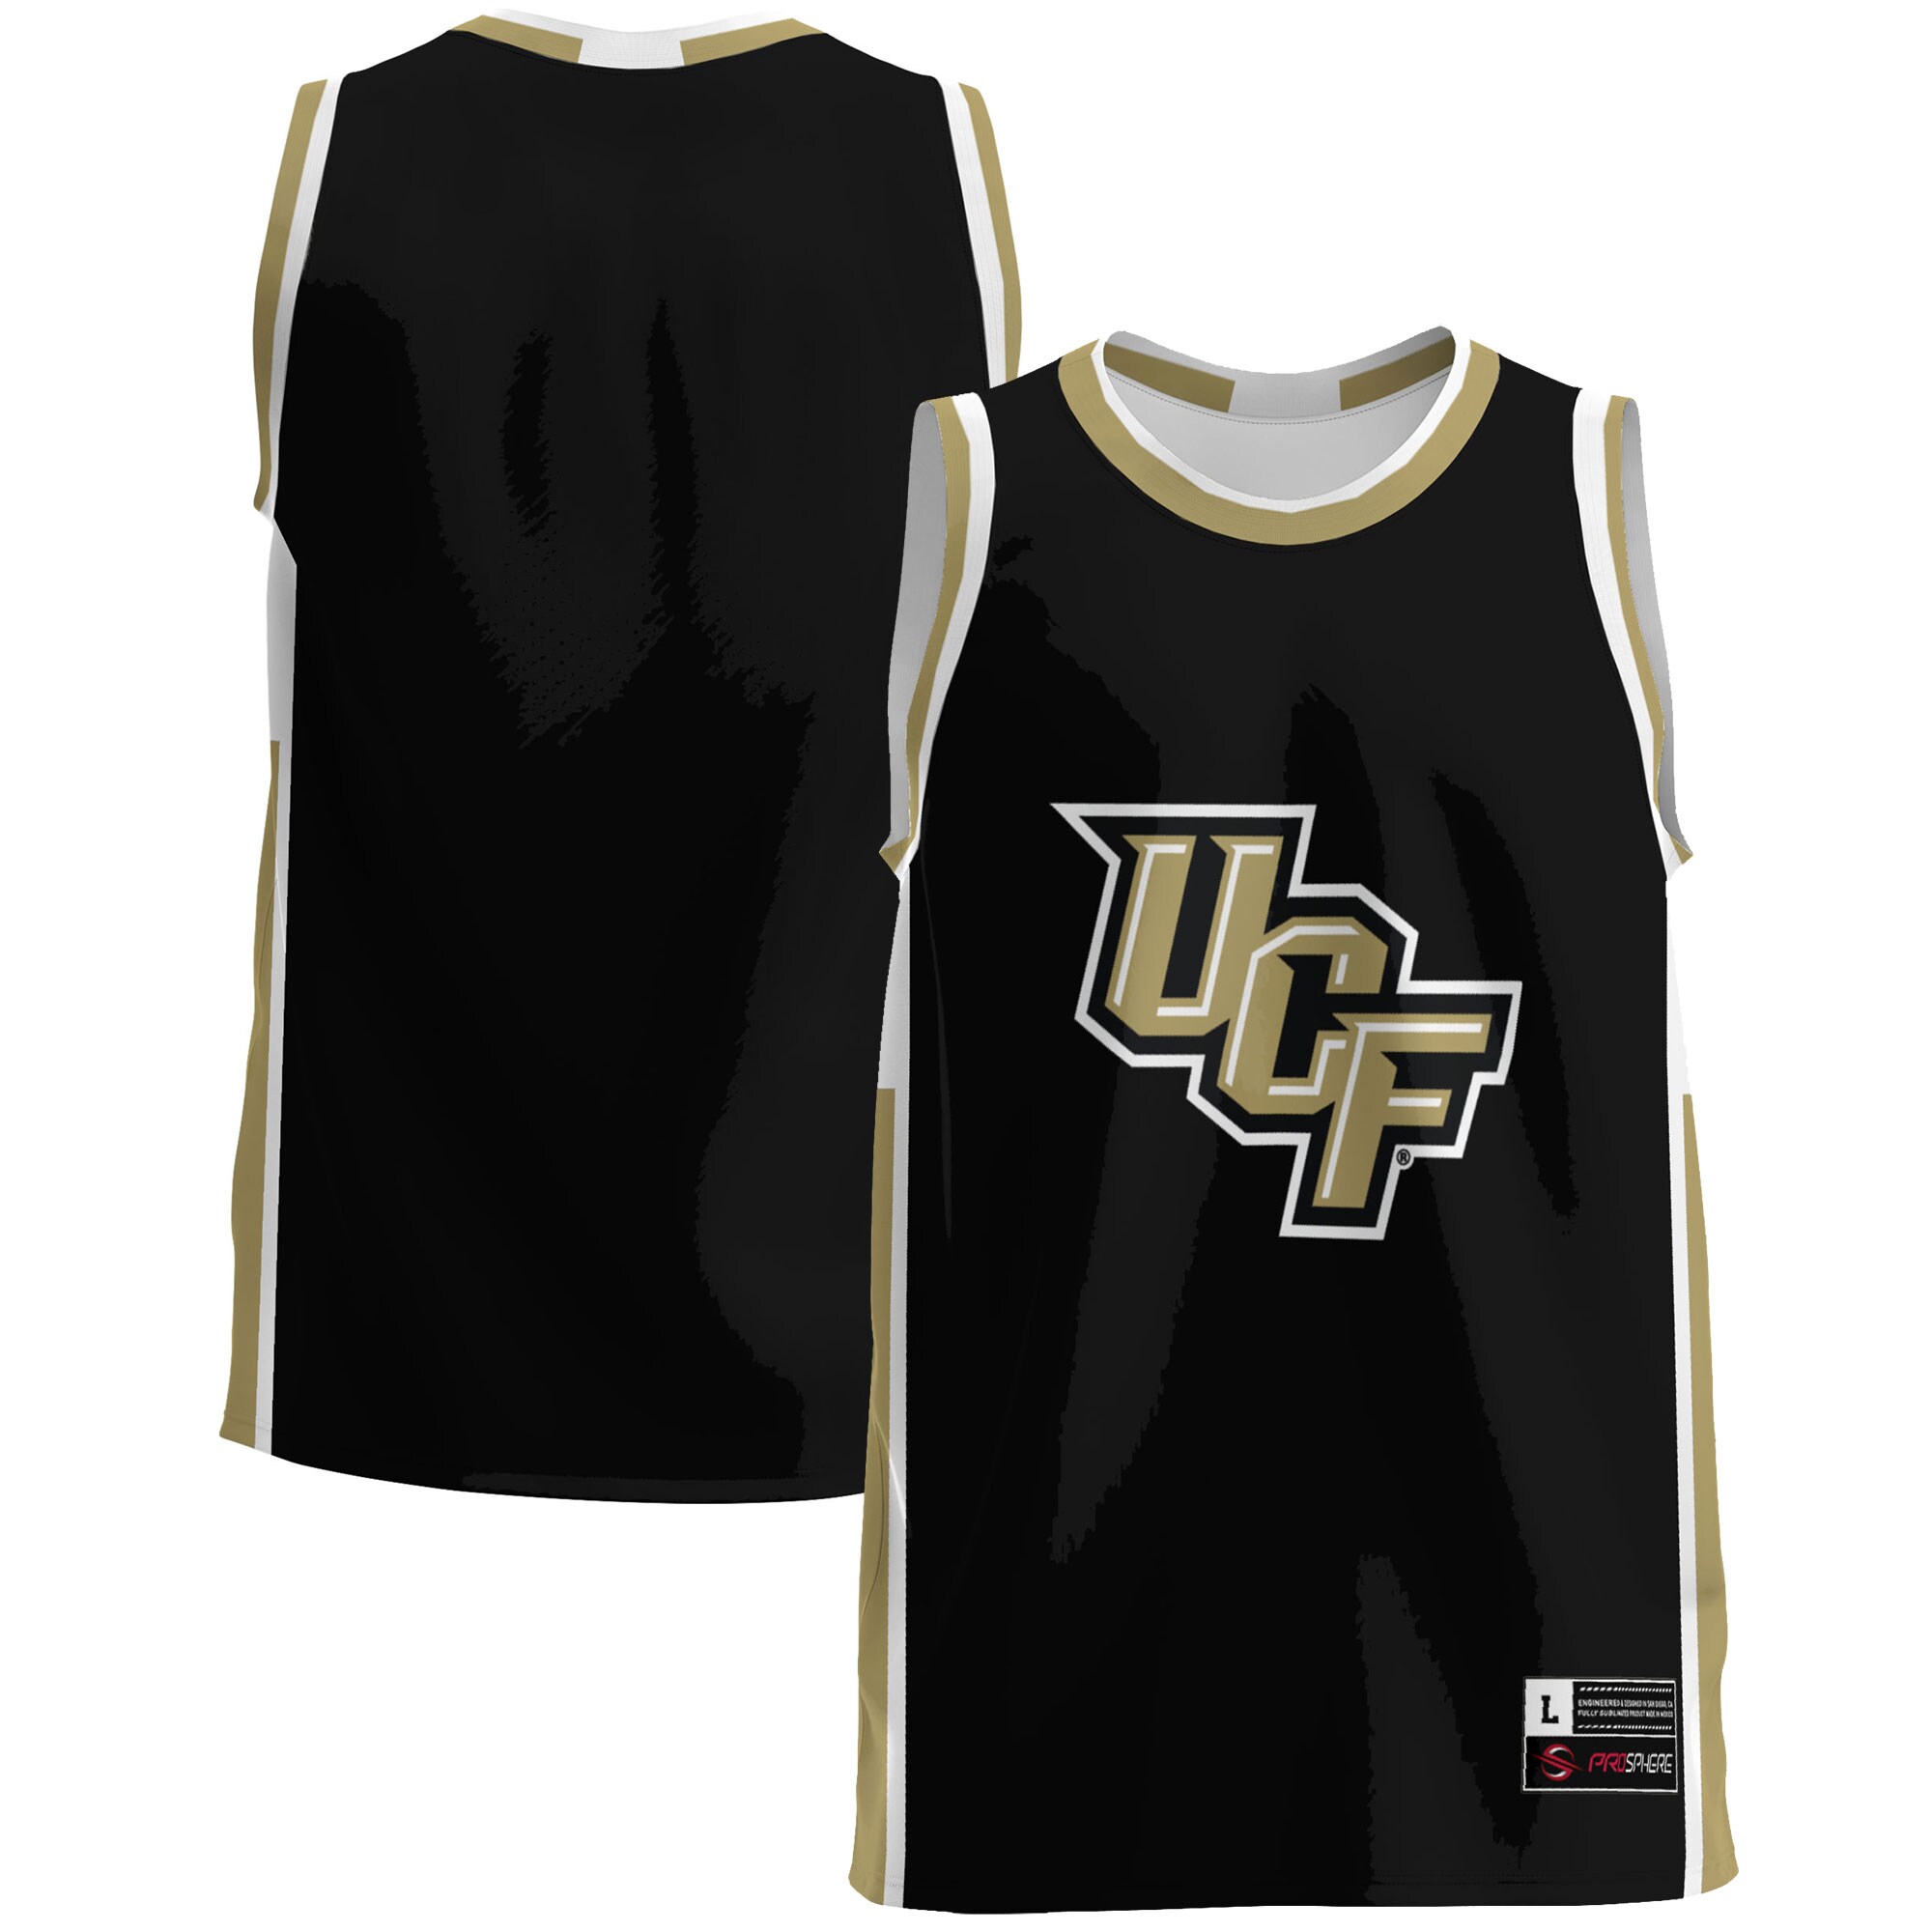 Ucf Knights Basketball Jersey - Black For Youth Women Men